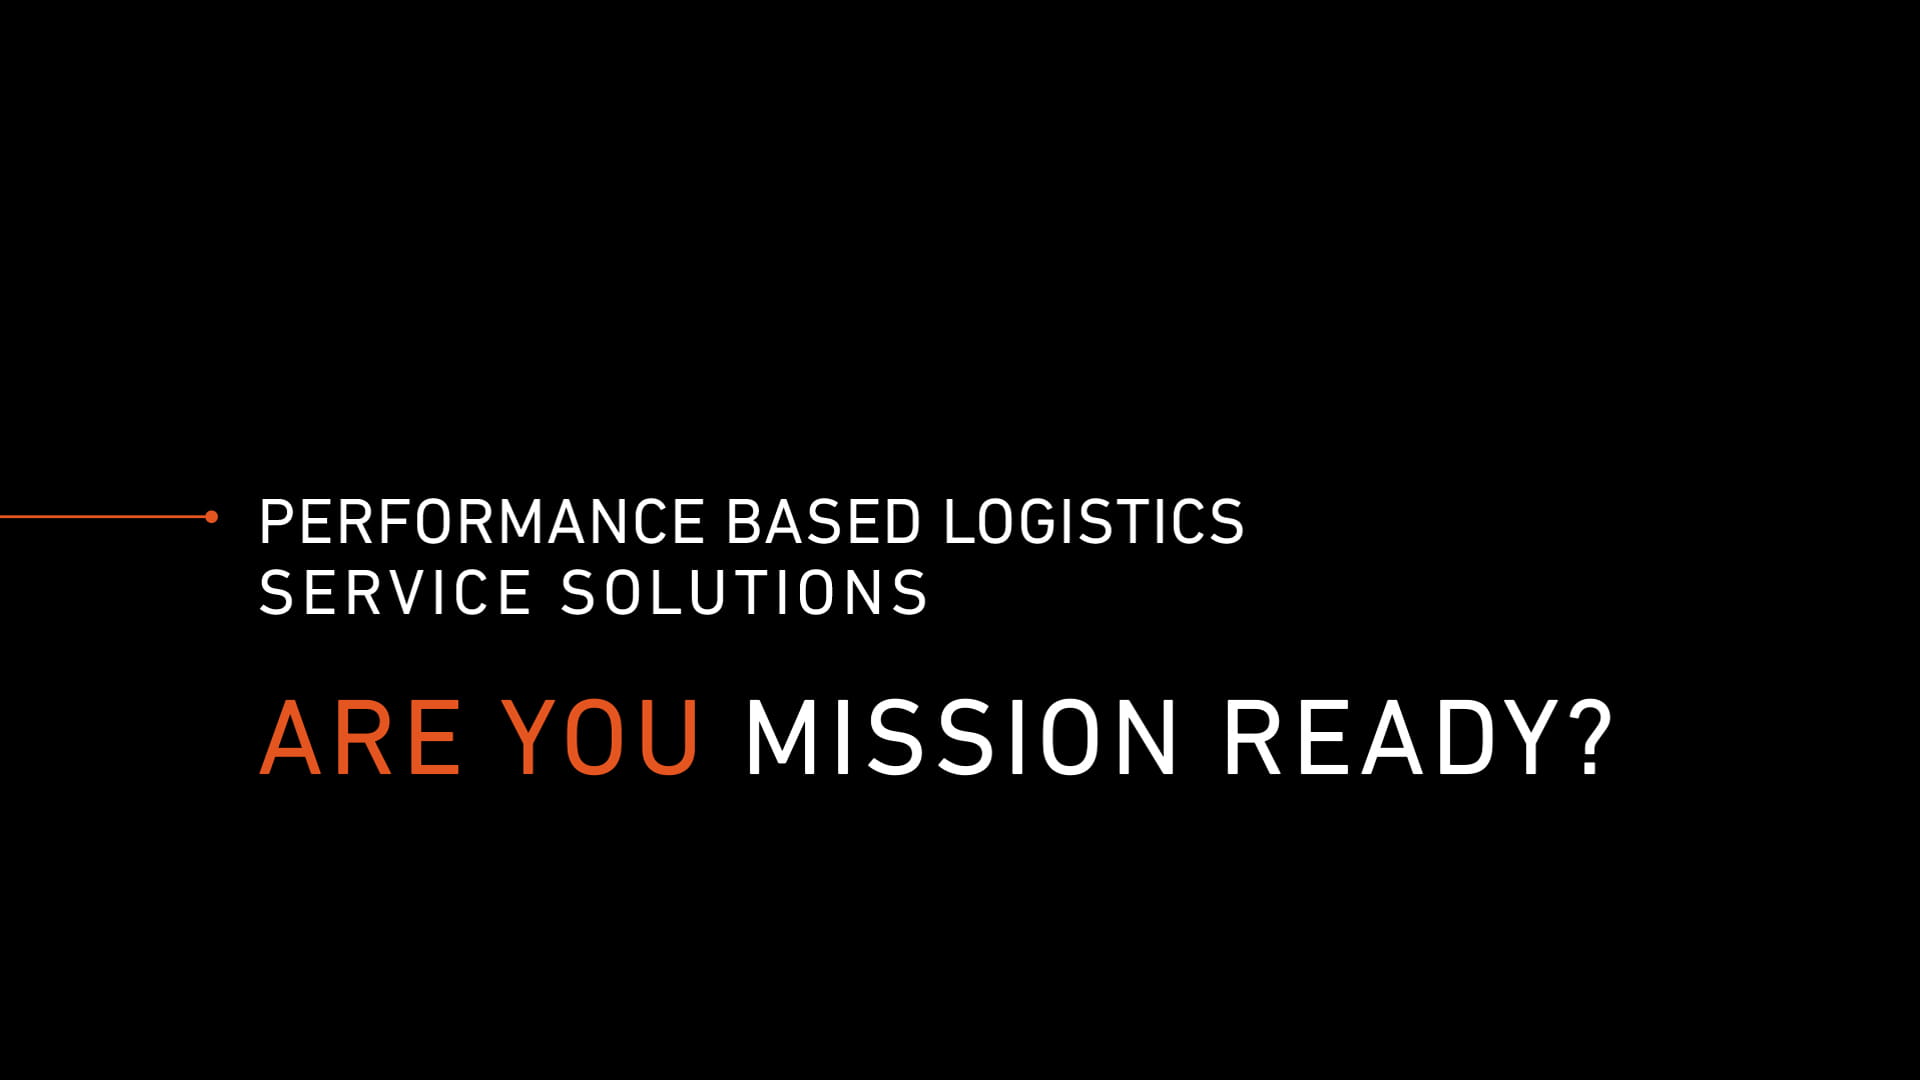 Performance based logistics service solutions. Are you ready?